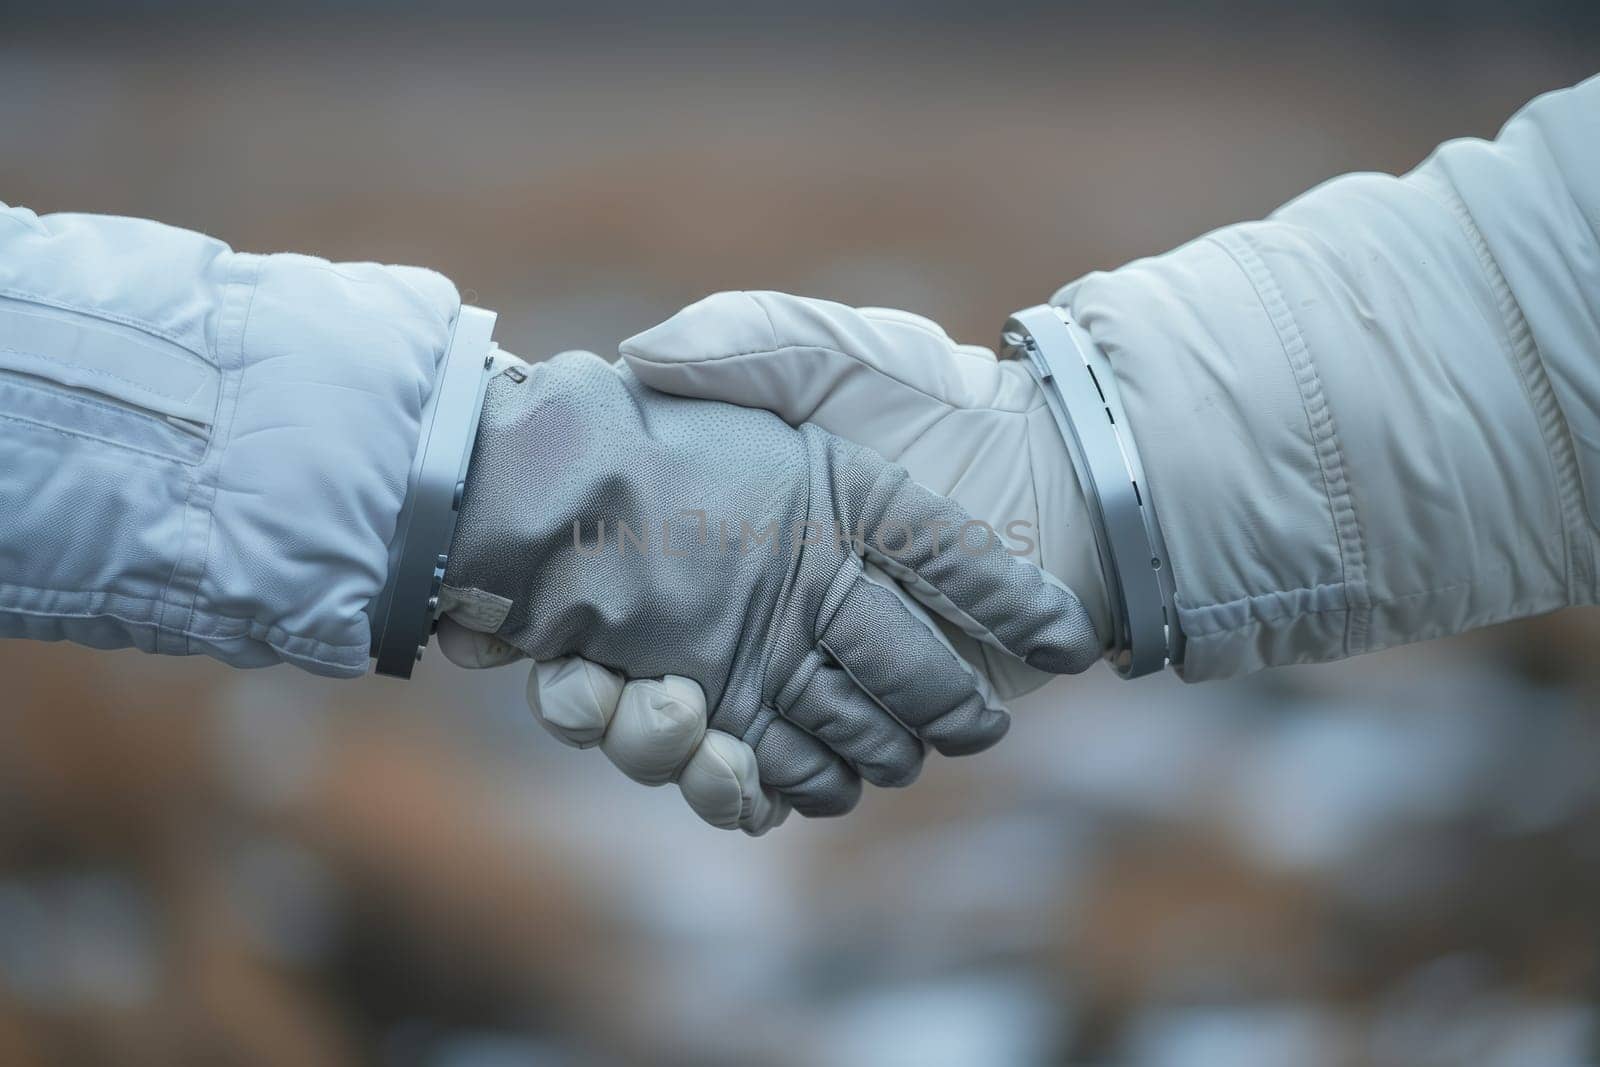 Handshake between two scientists in protective suits, collaboration and partnership in scientific research or hazardous environment by ailike